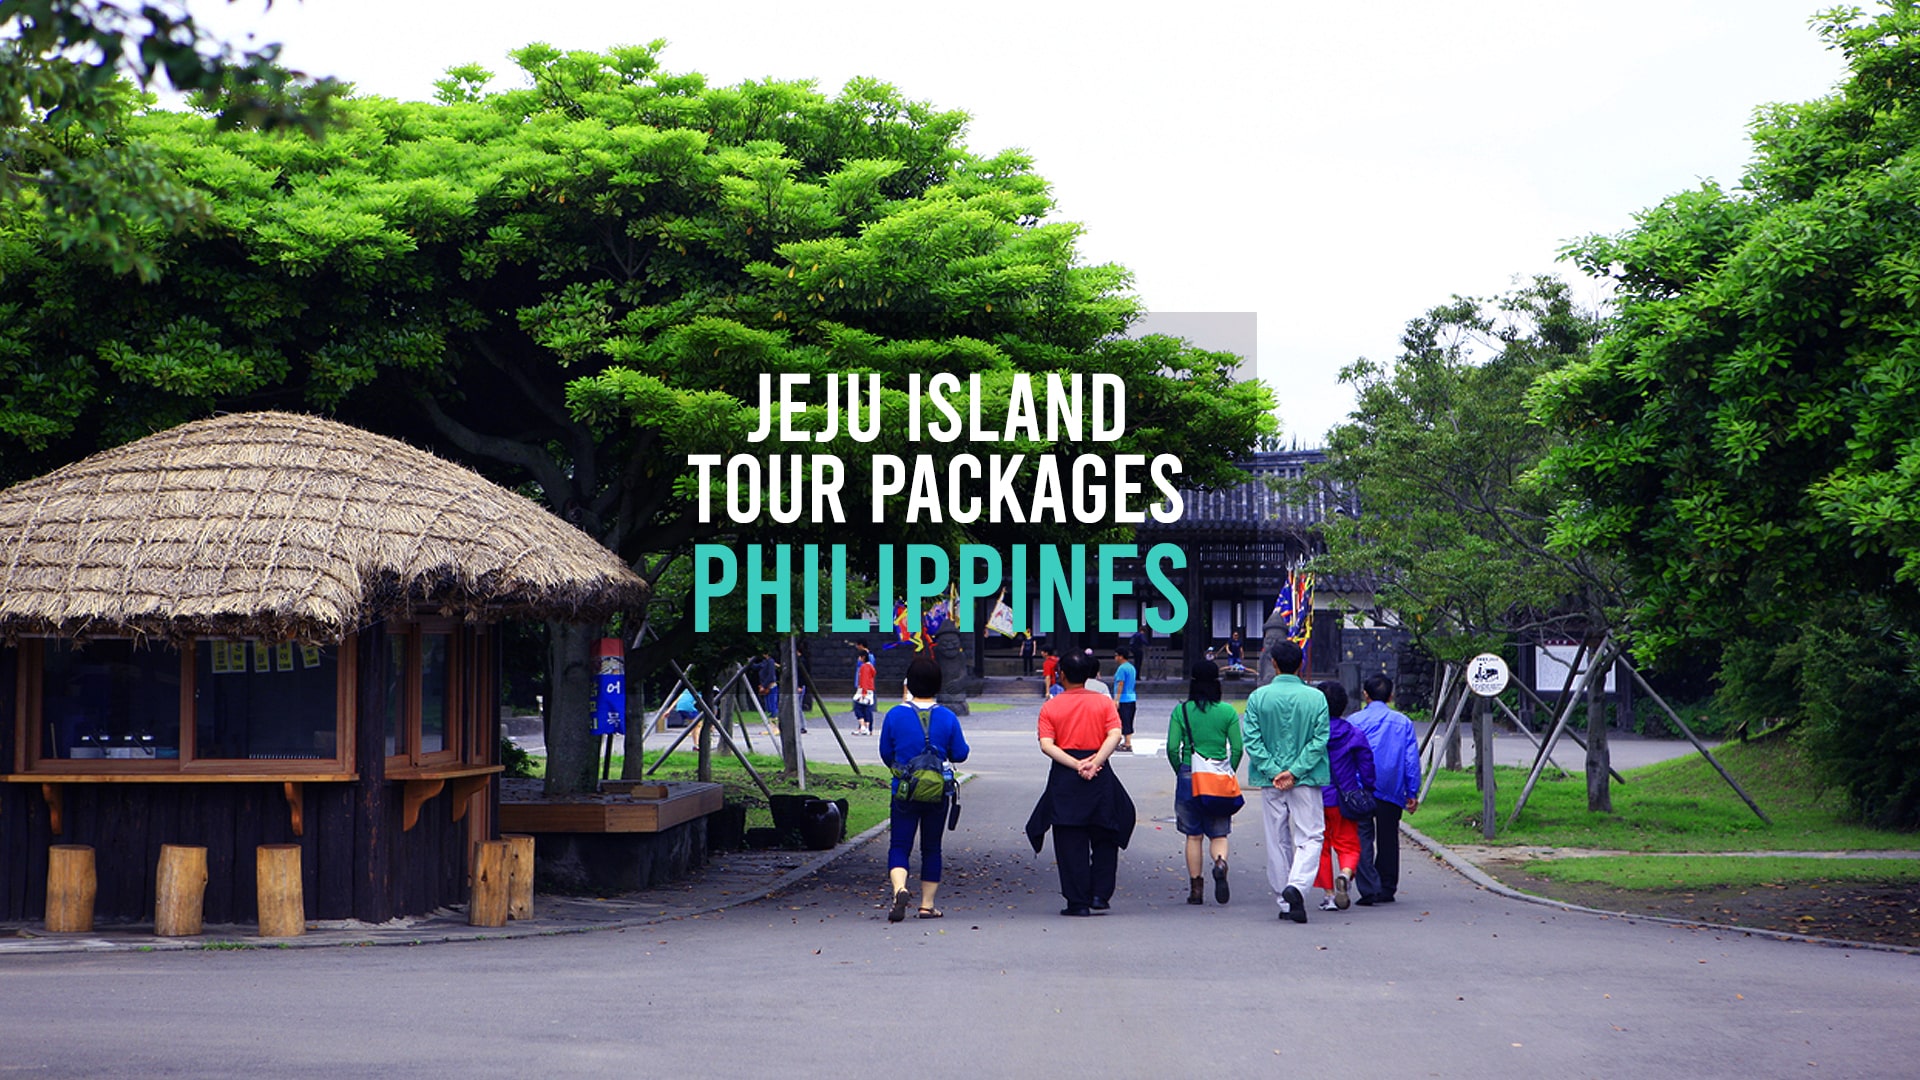 Jeju Island Tour Package from the Philippines 4 Days 3 Nights Regent